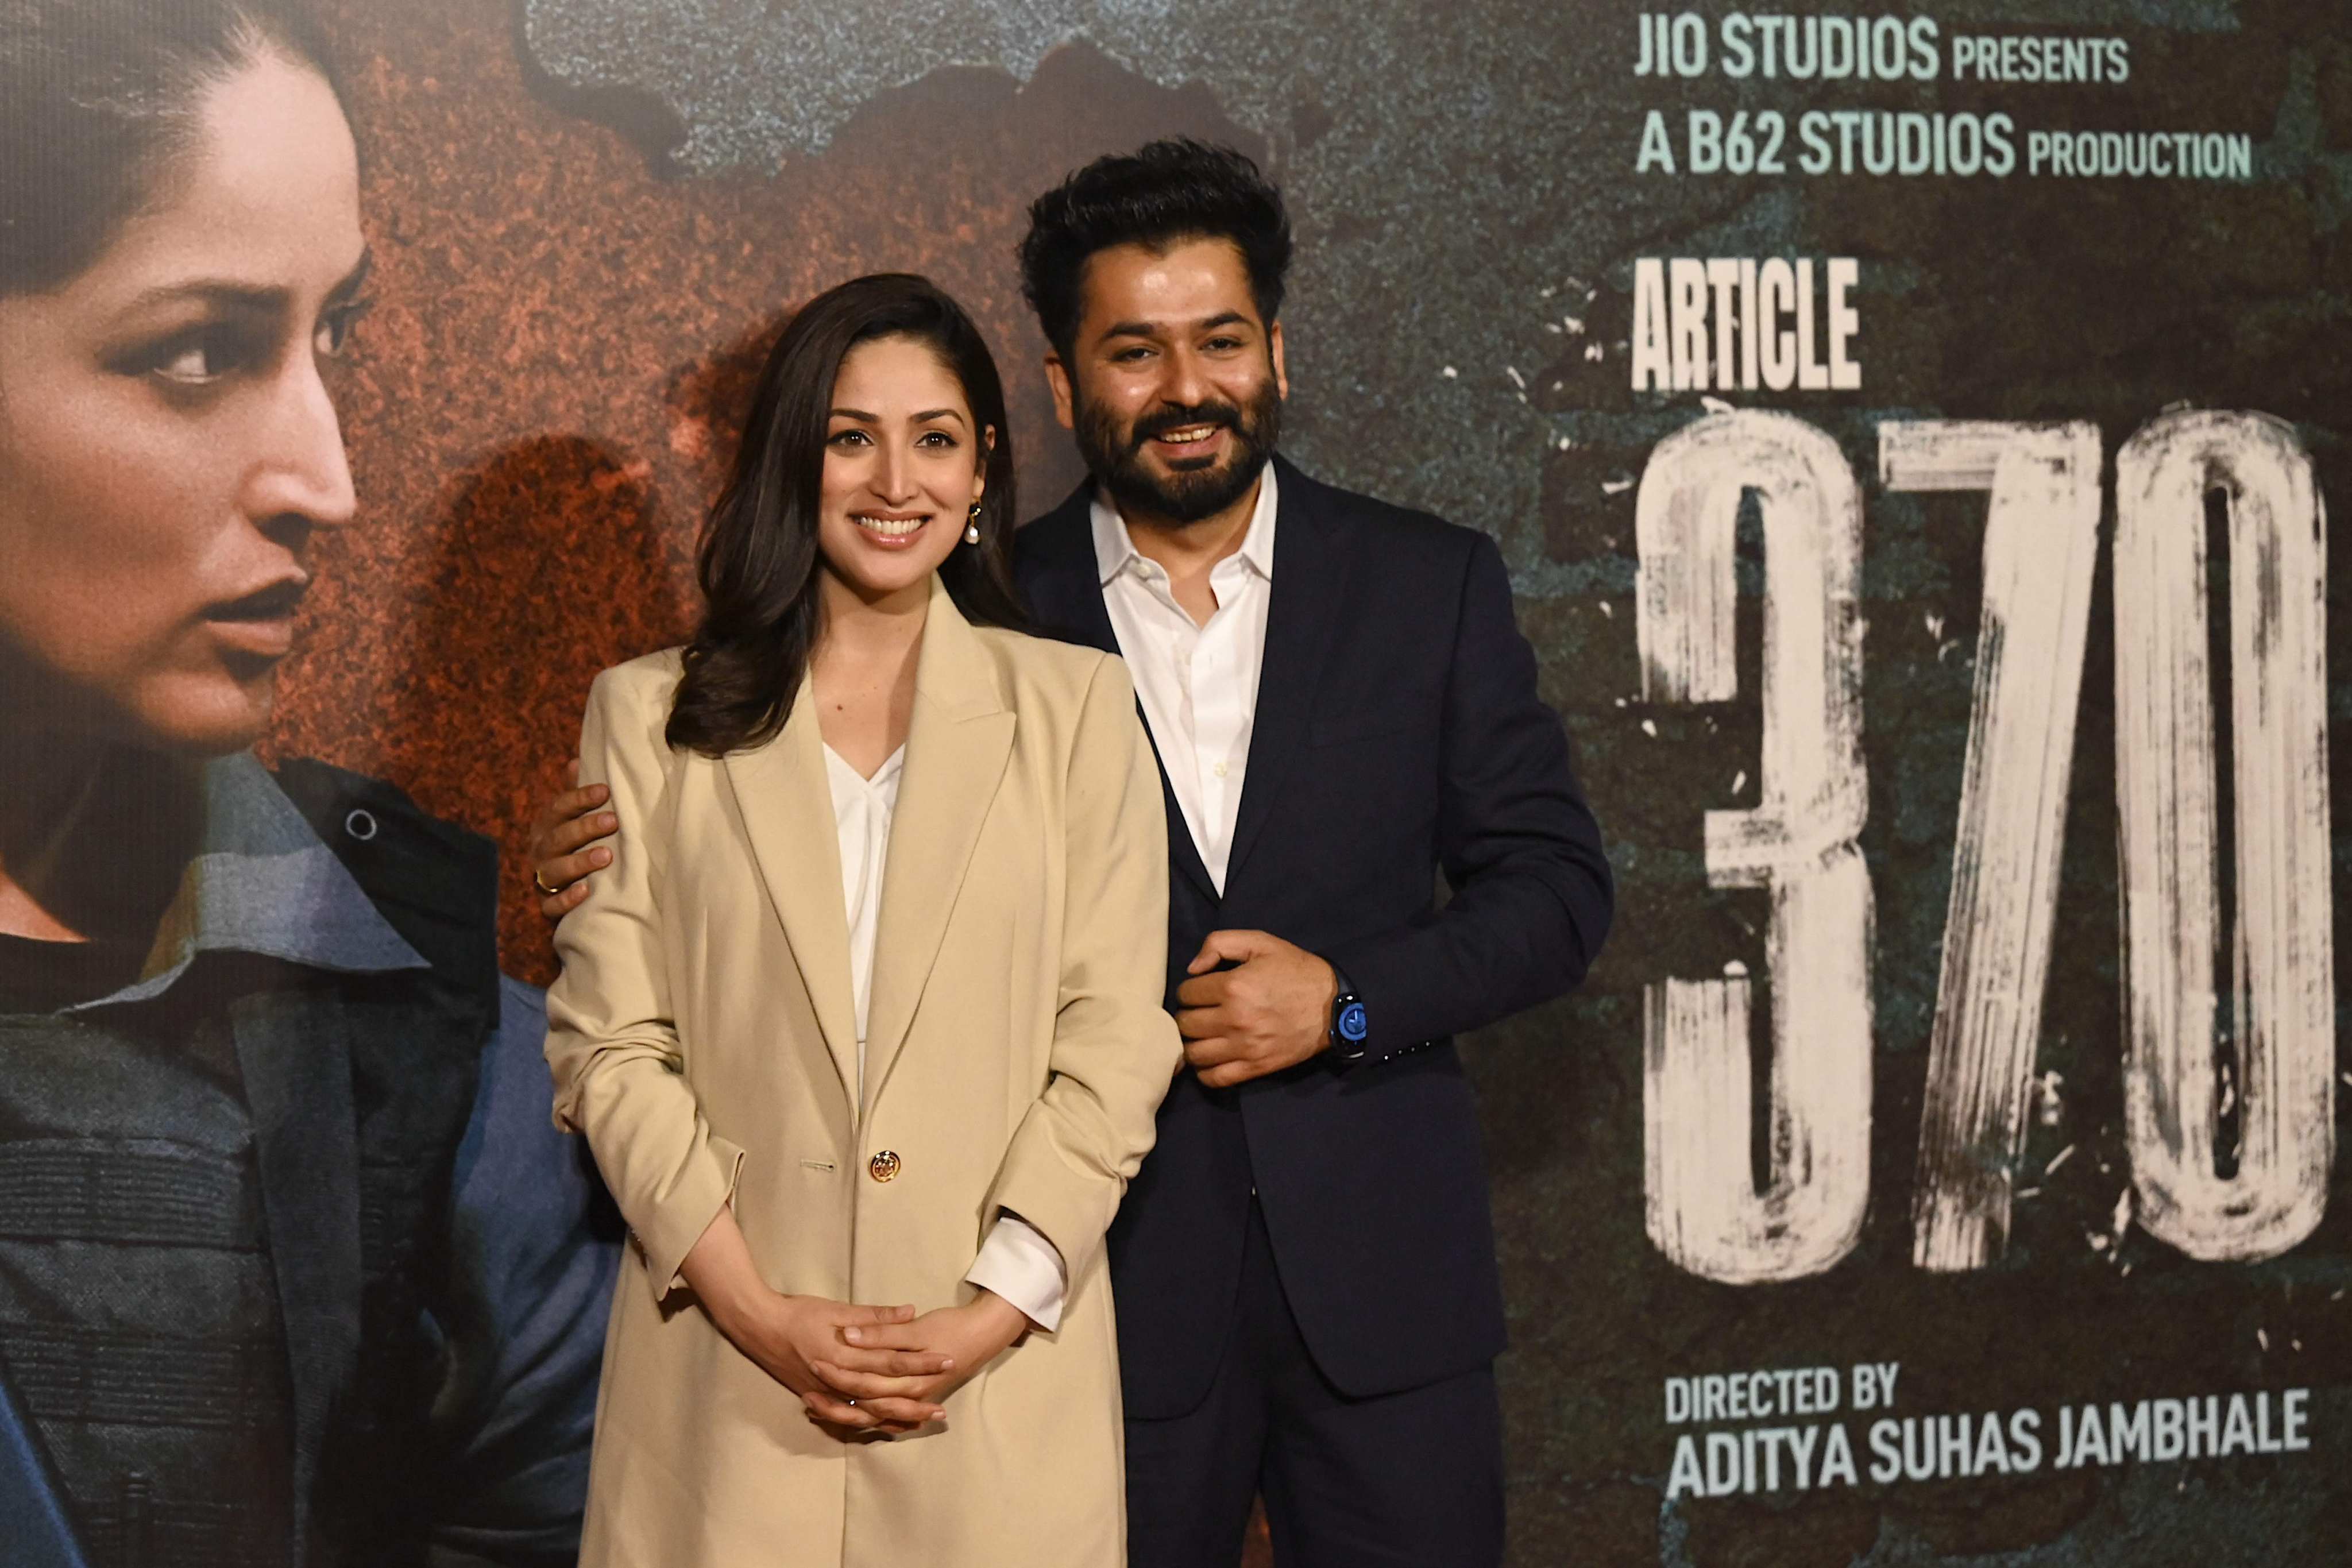 Bollywood actress Yami Gautam with her husband and director Aditya Dhar attend the trailer launch of their Hindi-language film “Article 370” in Mumbai on February 8. Photo: AFP